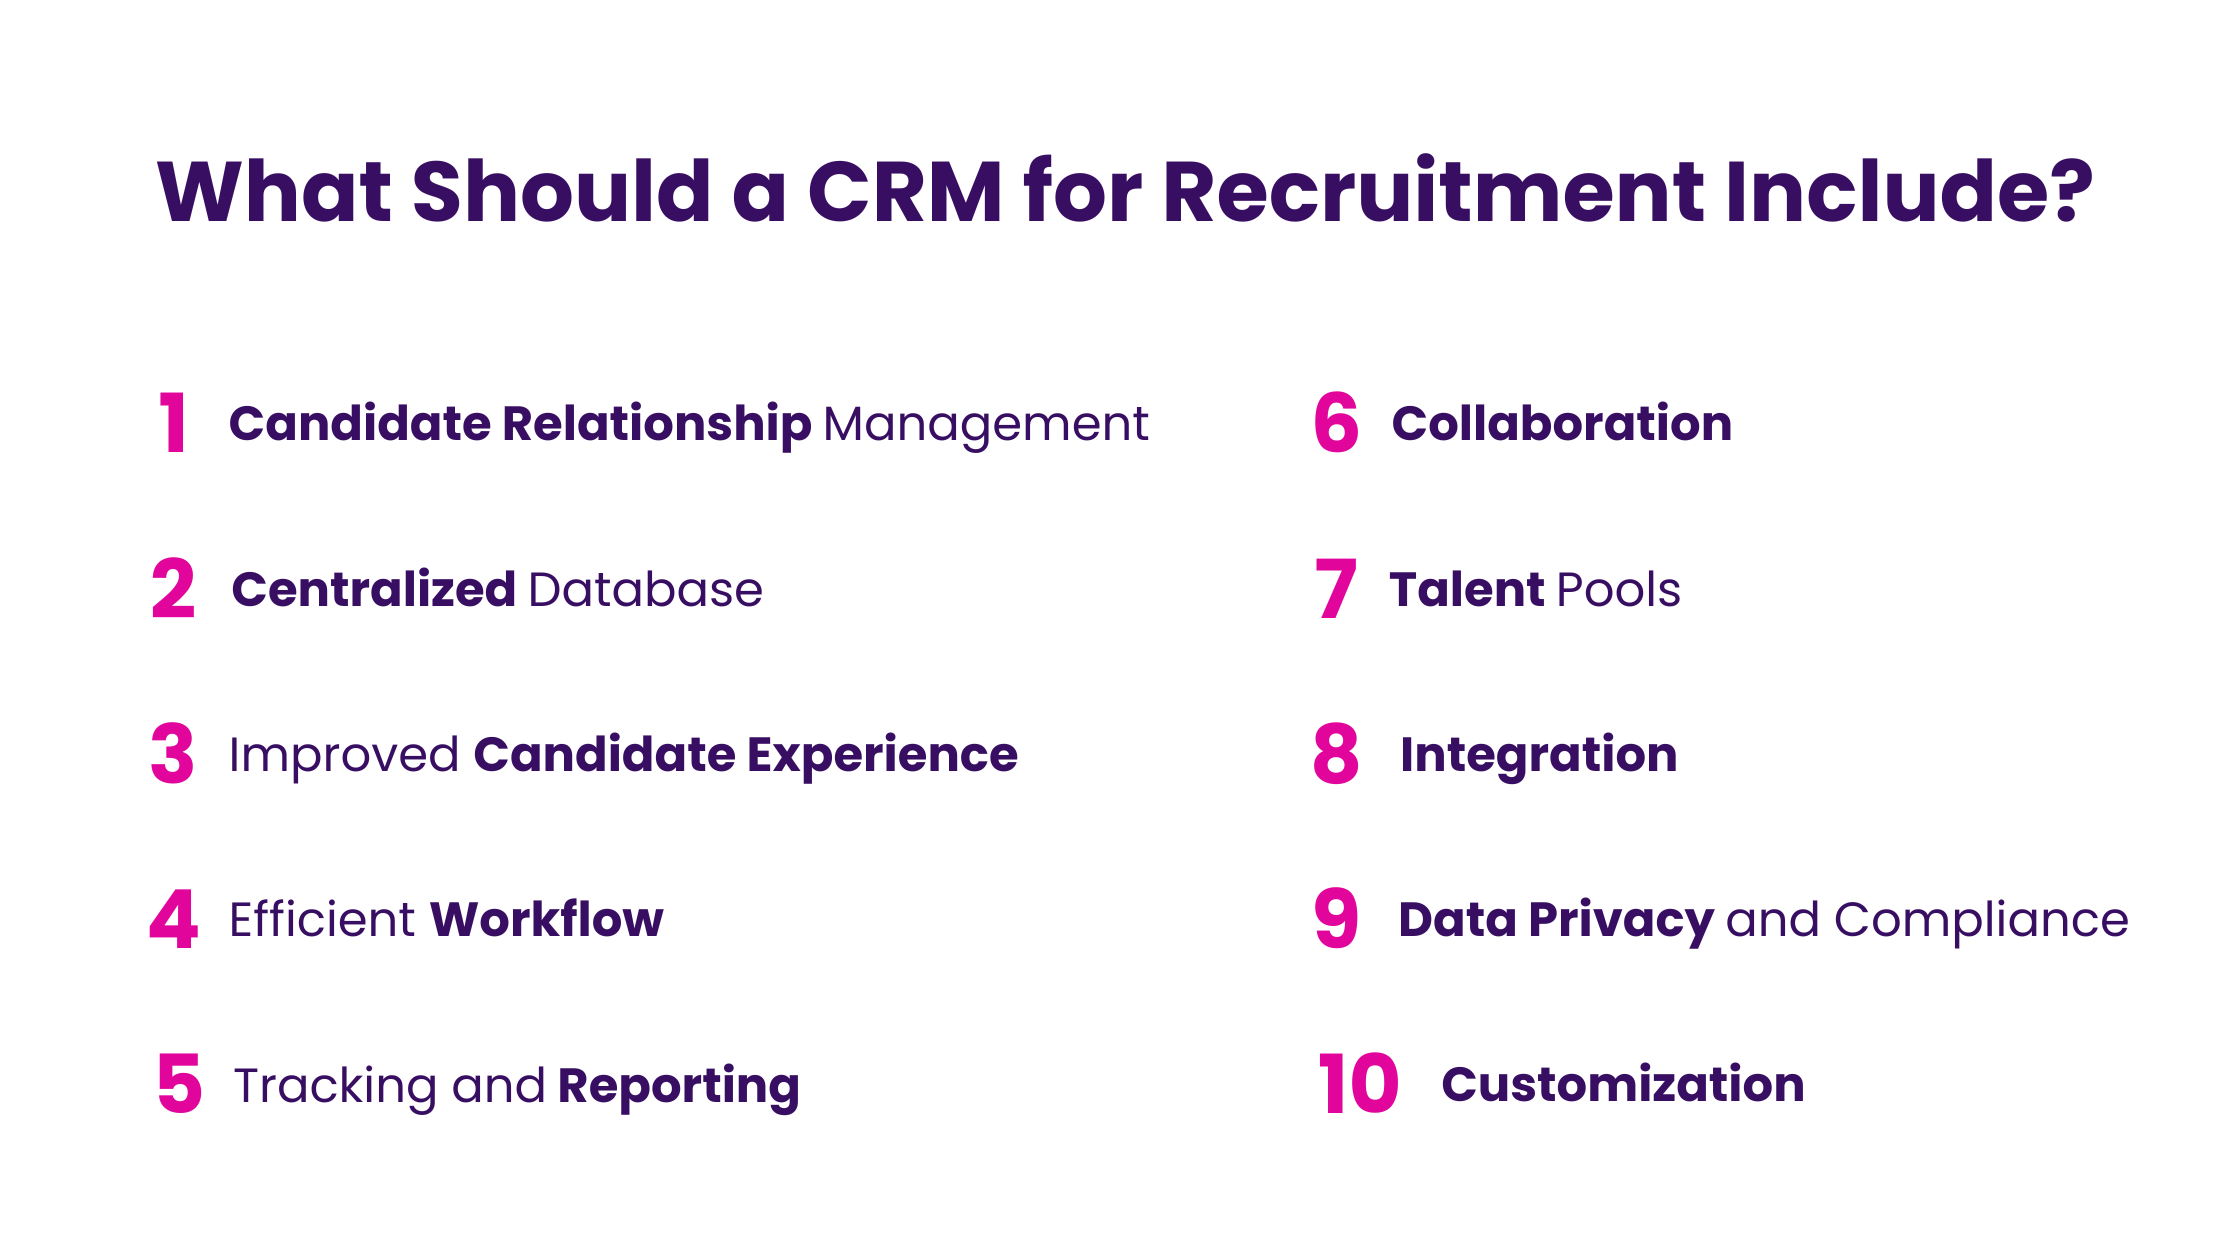 What Should a CRM for Recruitment Include